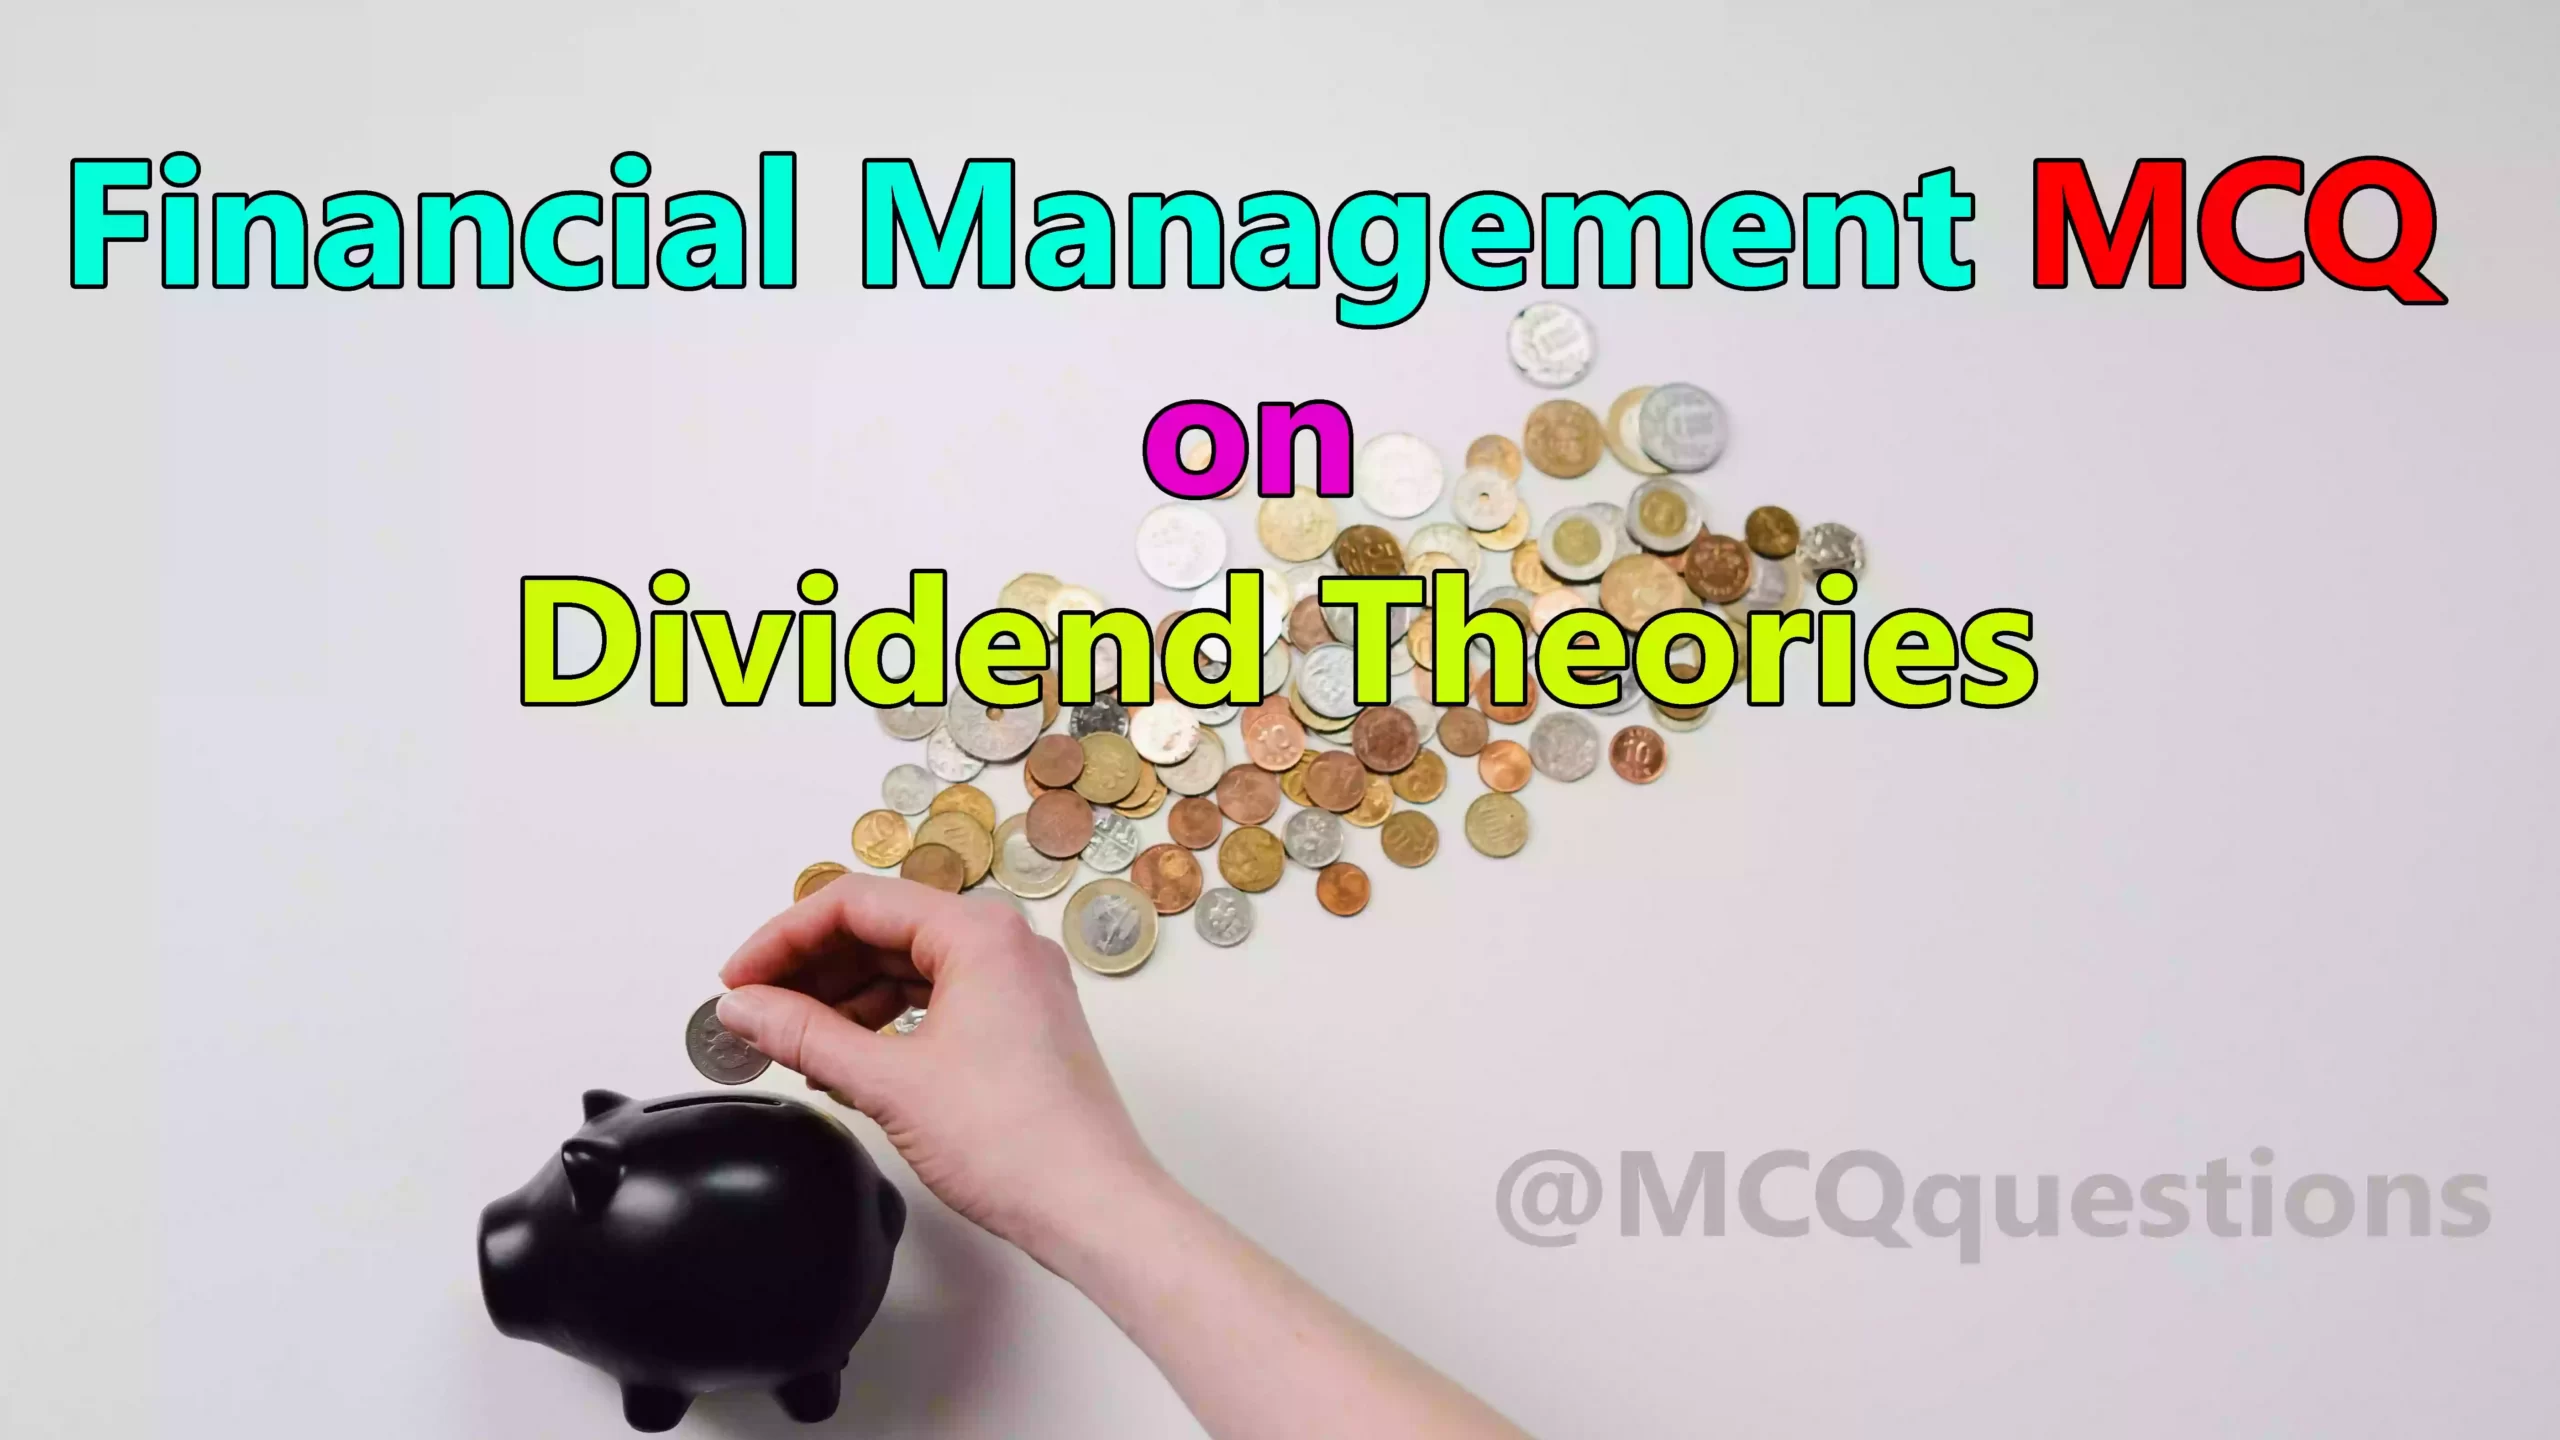 Financial Management MCQ on Dividend Theories